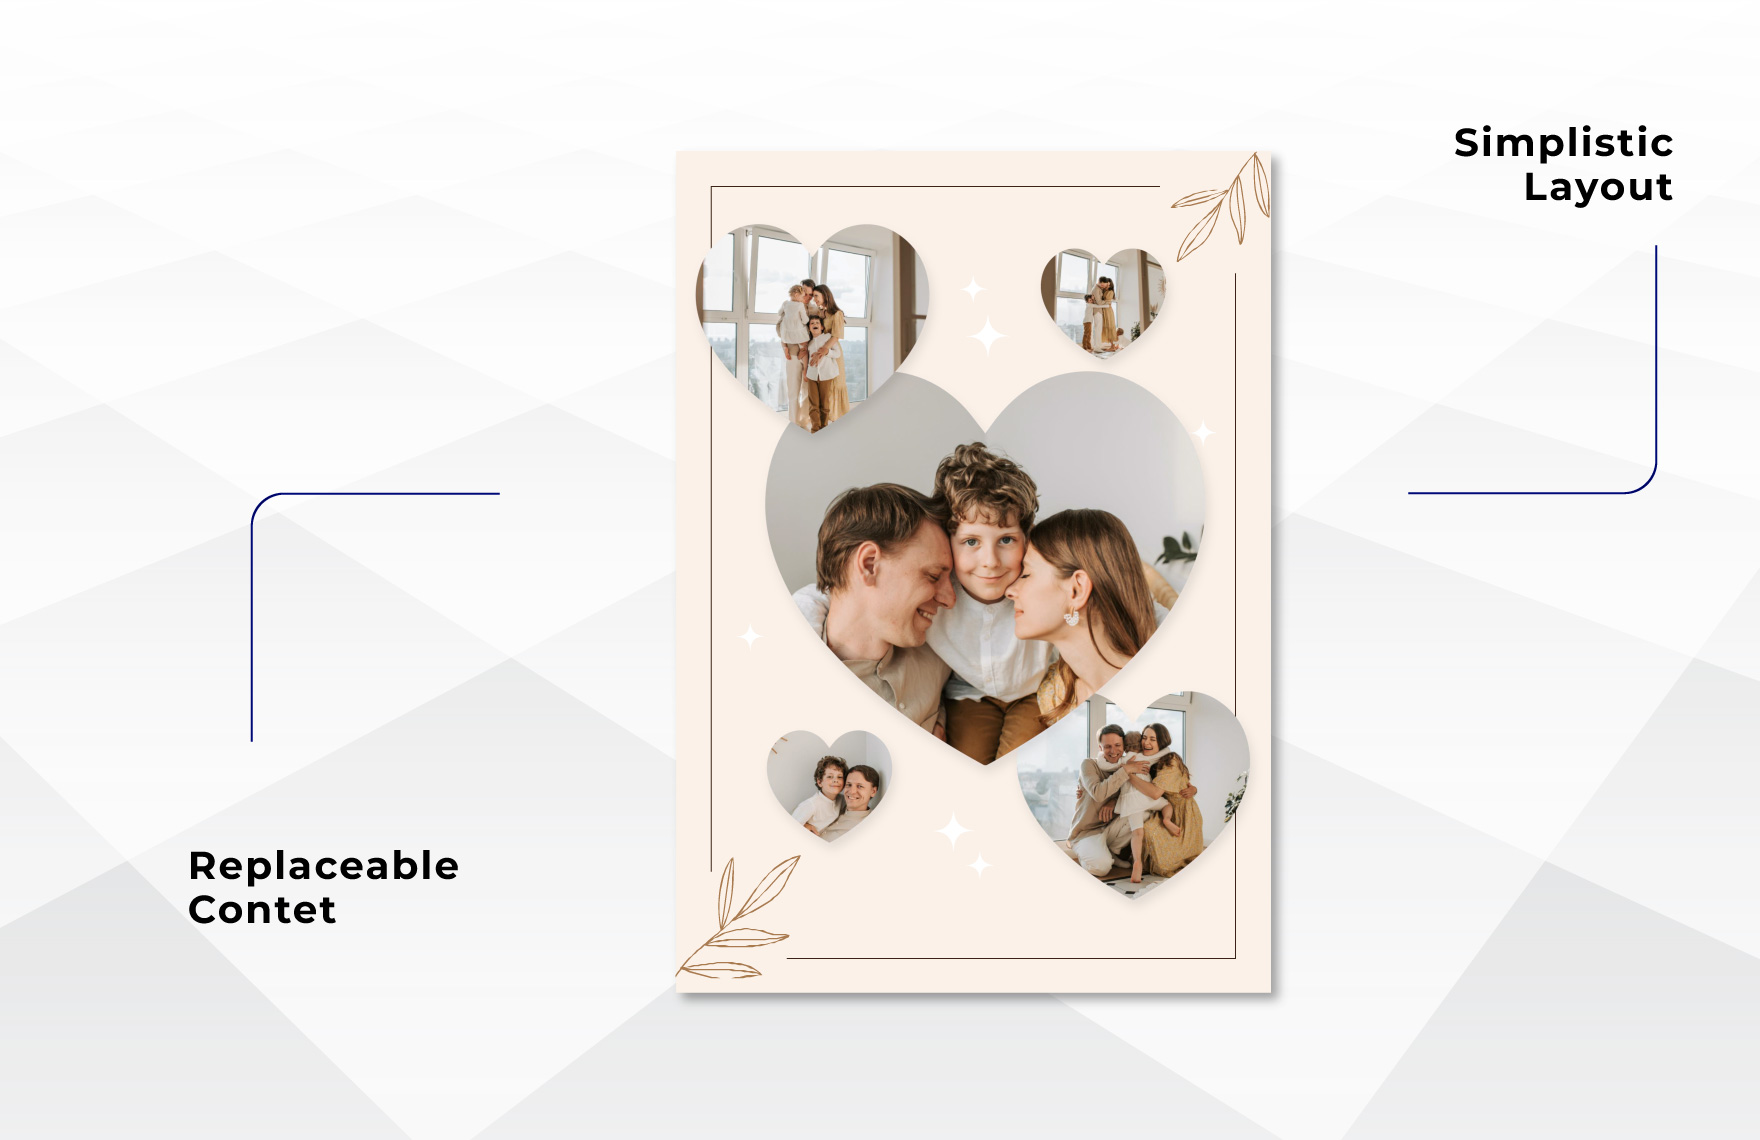 Family Collage Template